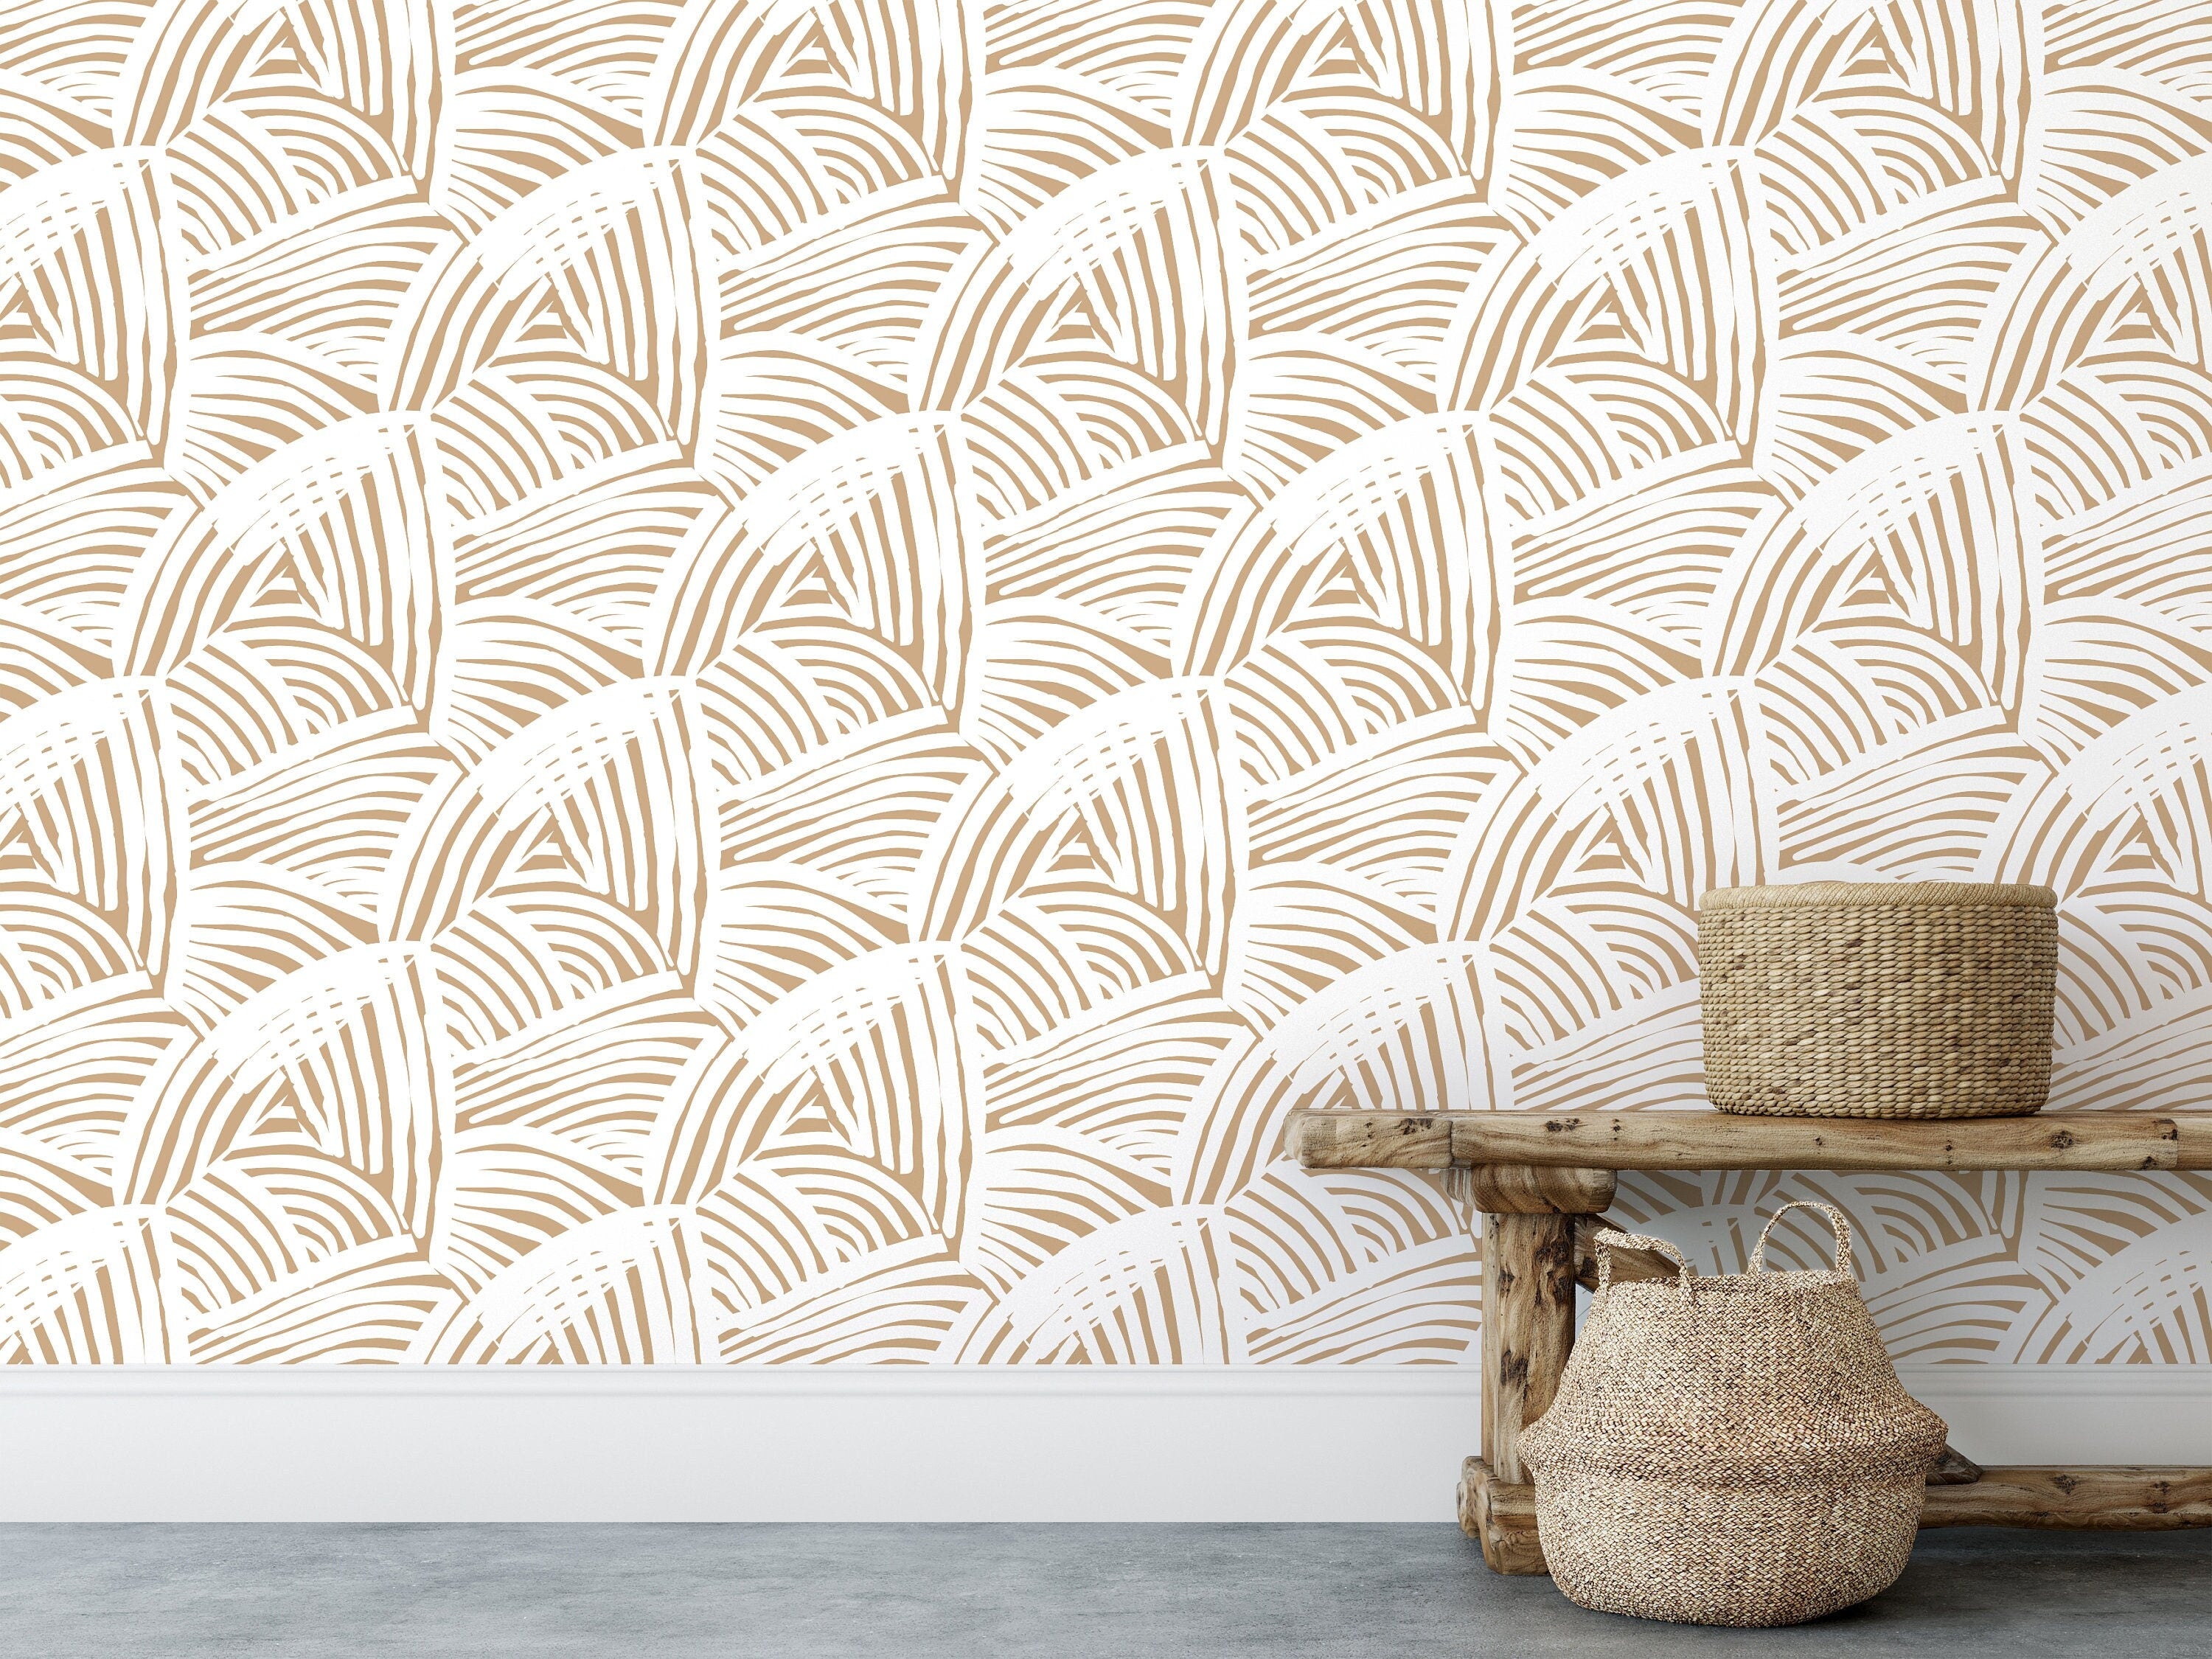 Removable Wallpaper Tan And White Modern Wallpaper | Peel And Stick Wallpaper | Adhesive Wallpaper | Wall Paper Peel Stick Wall Mural 3526 - JamesAndColors